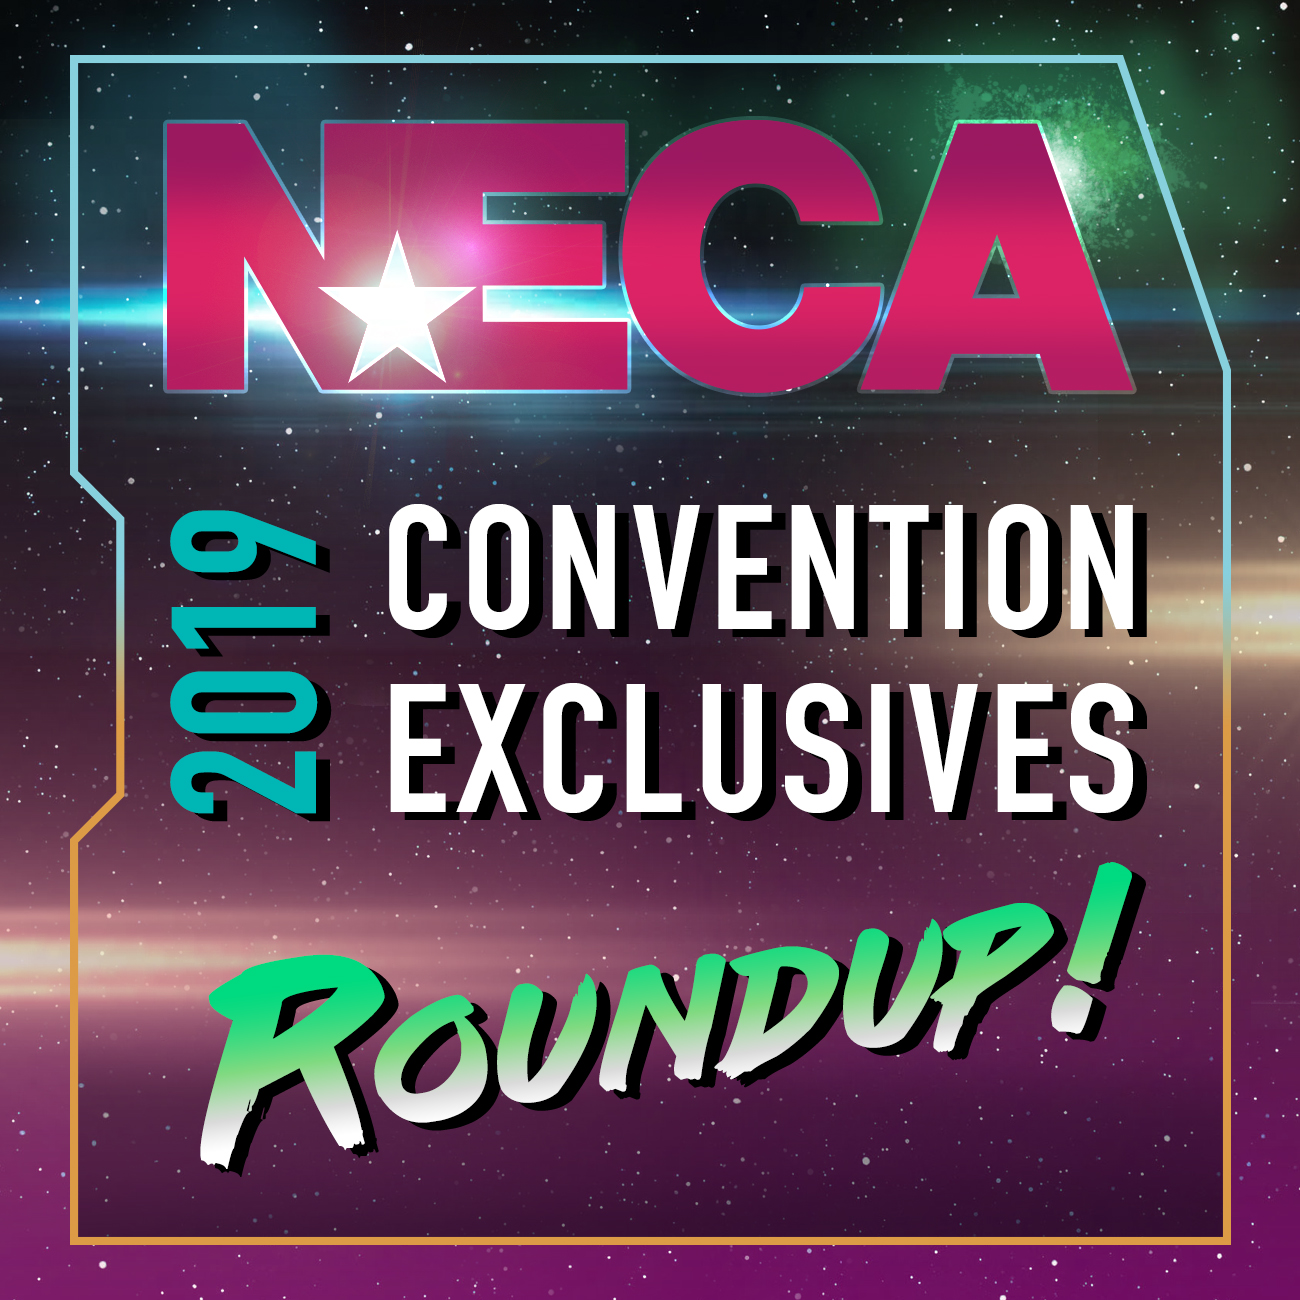 NECAOnline.com | 2019 Convention Exclusives: Complete Roundup and Pre-Sale Details